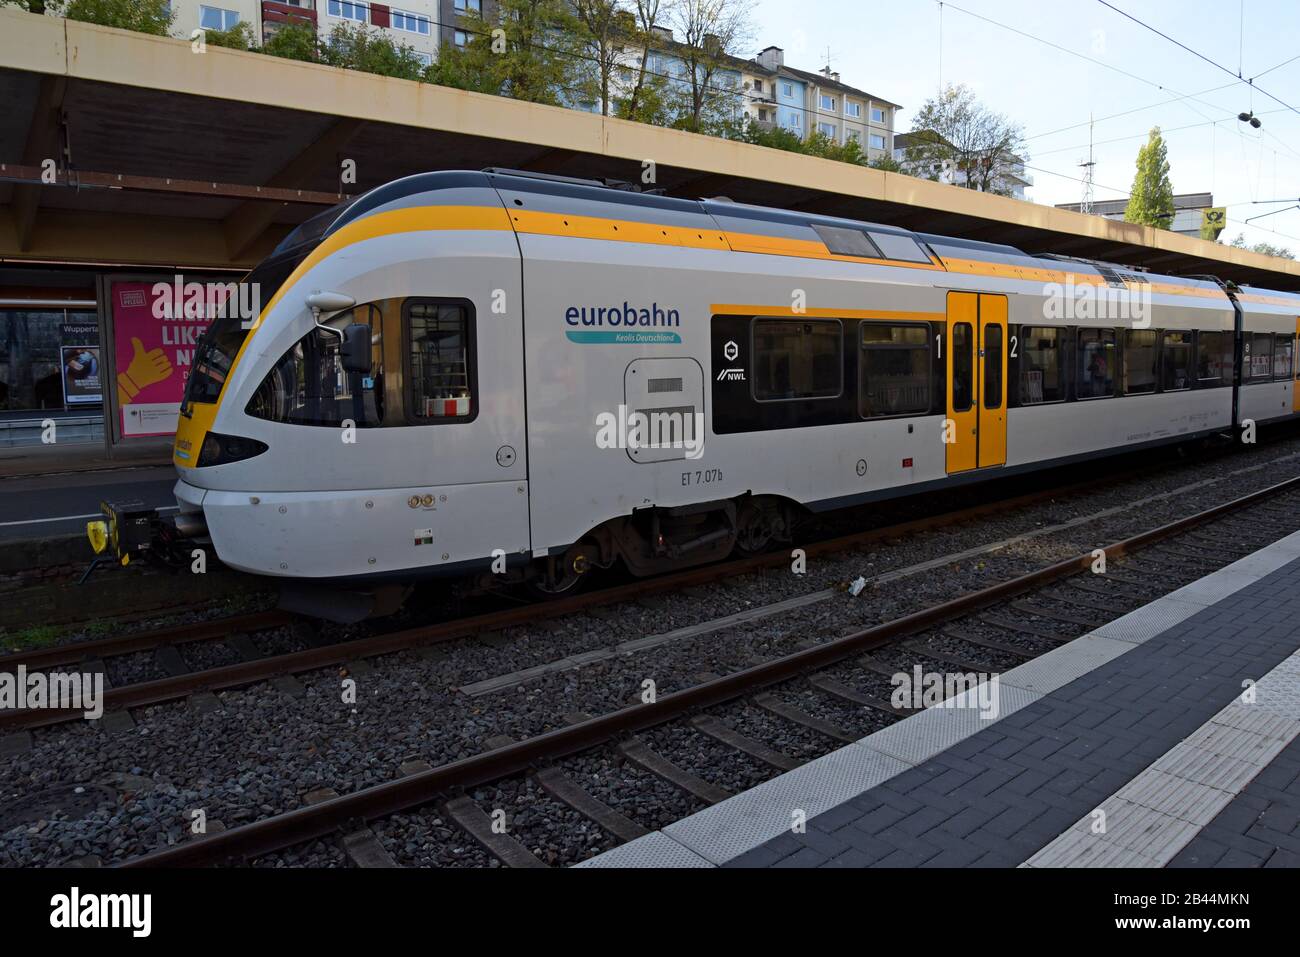 A Stadler Flirt Electric multiple Unit train operated by Keolis Eurobahn at Wuppertal Station, Germany Stock Photo